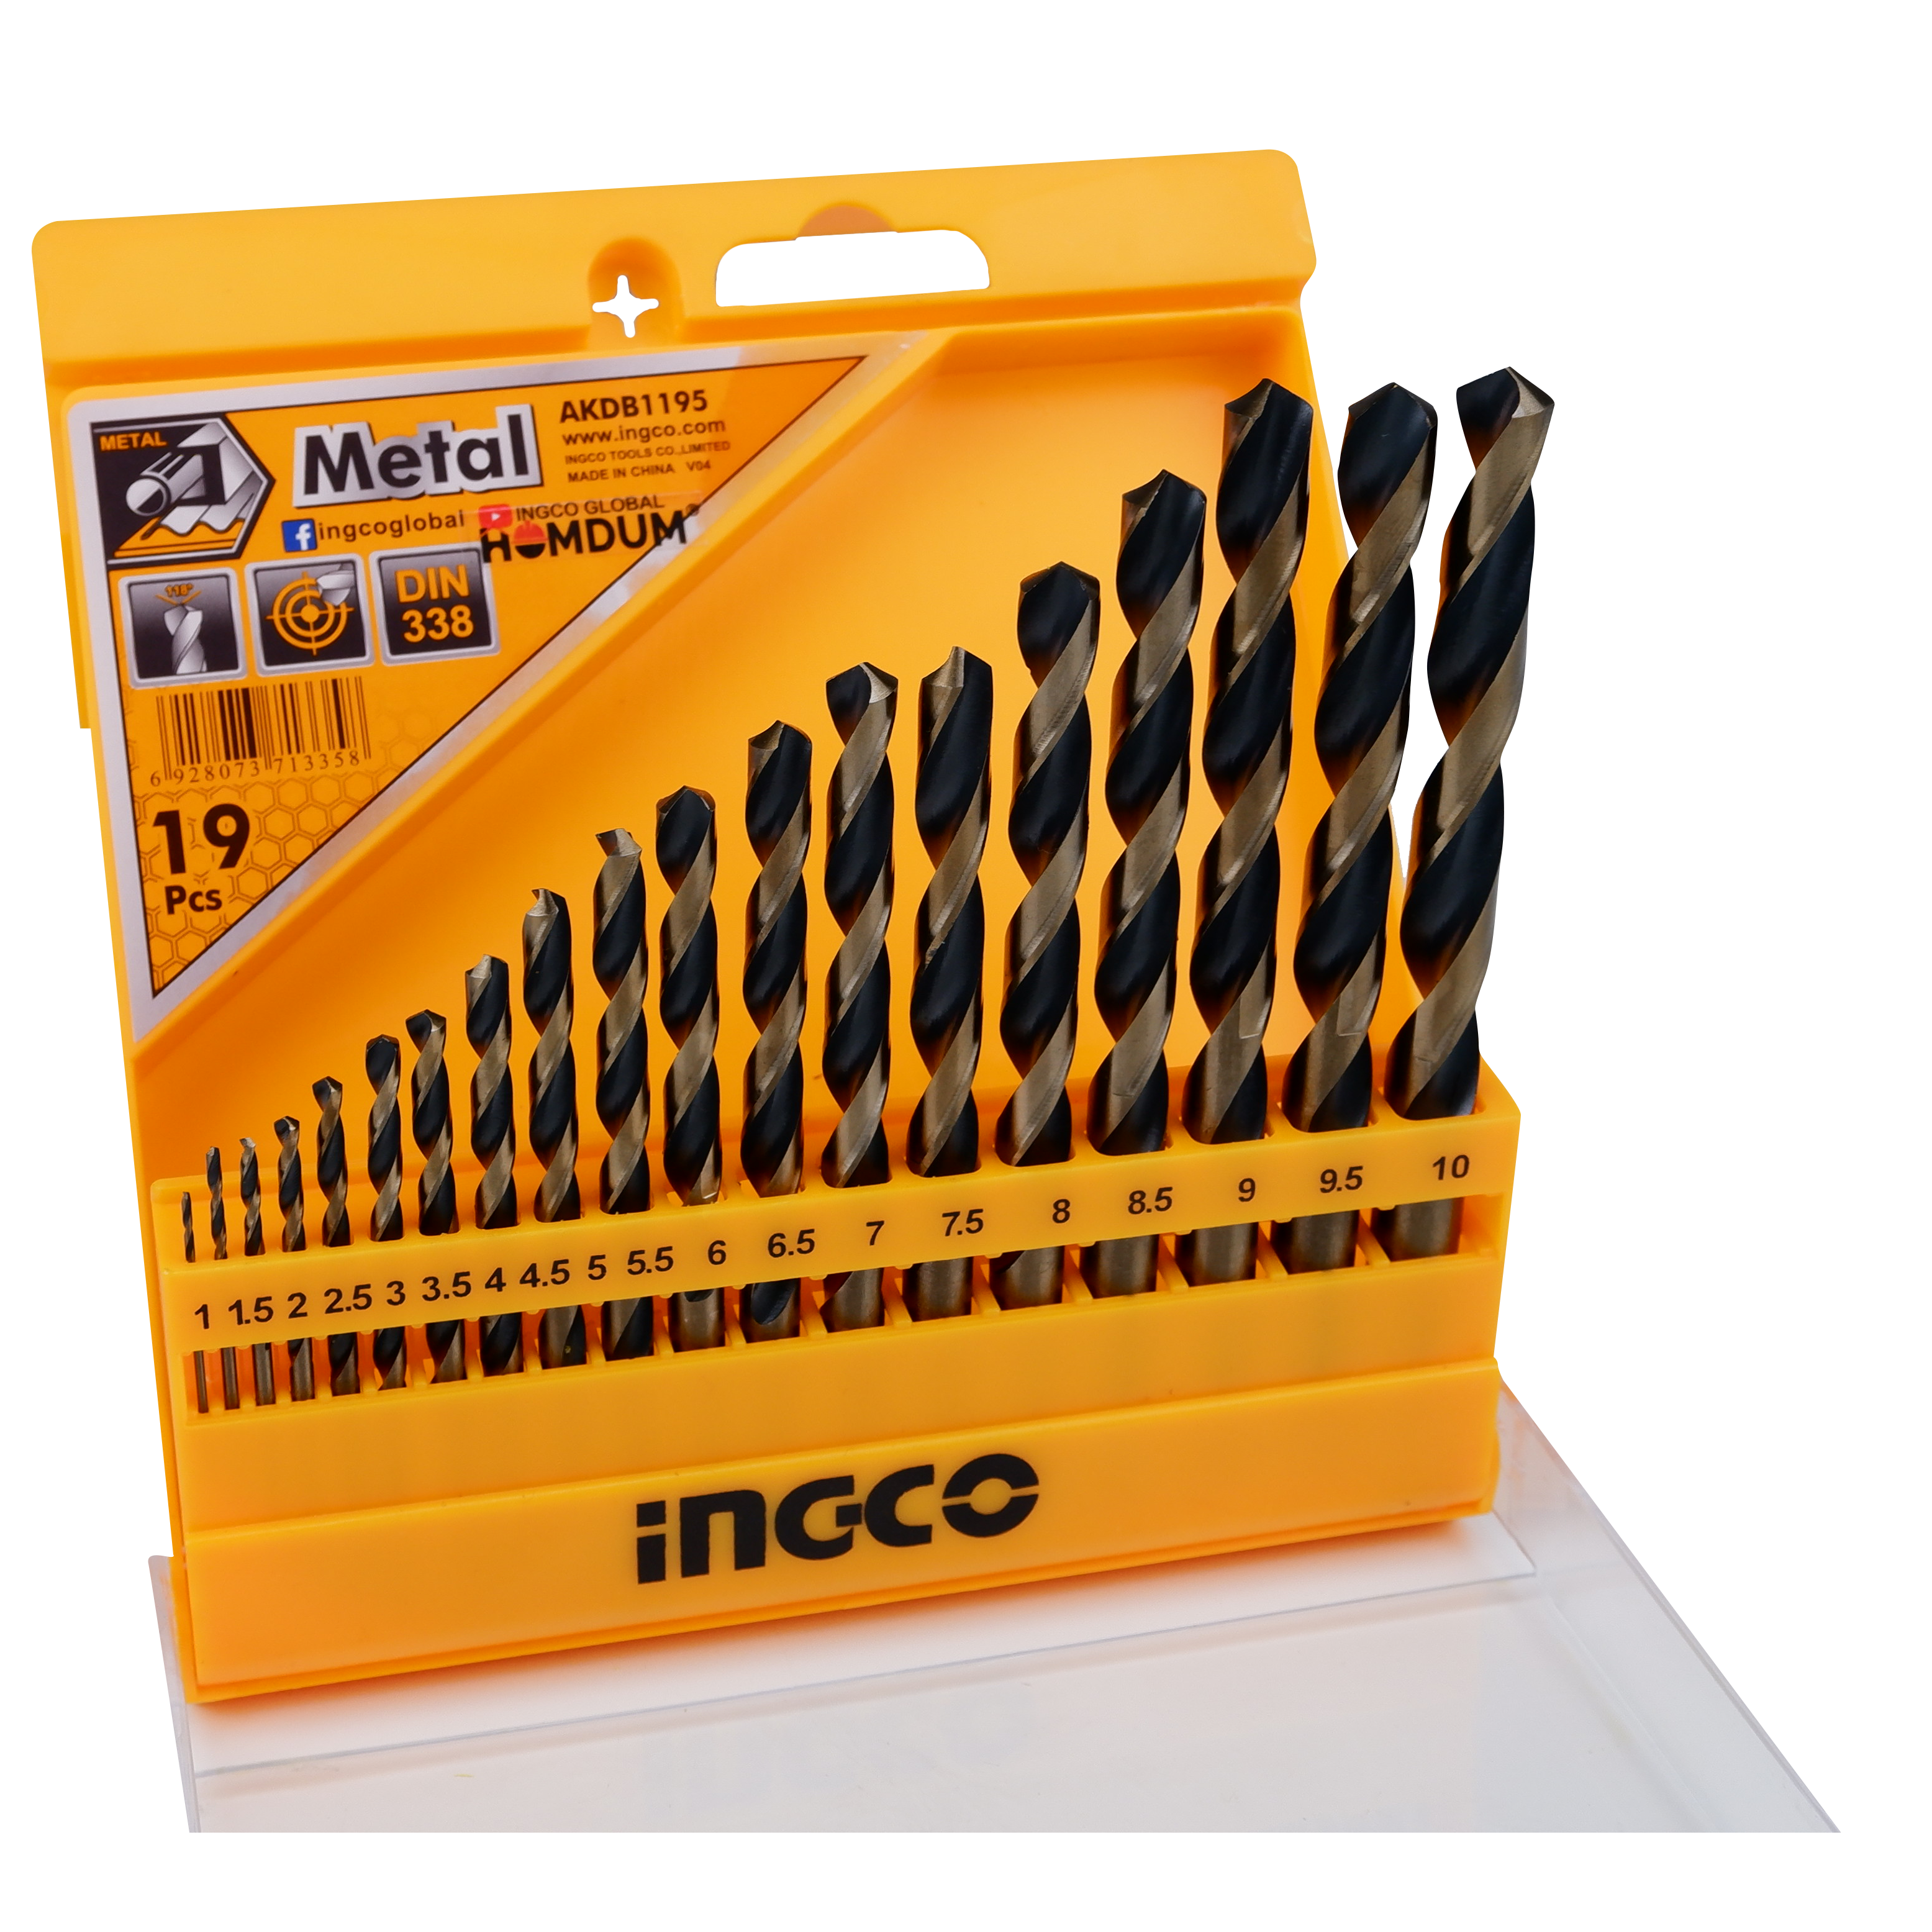 Homdum 19pcs Metal Working drill bit set INGCO black oxide finish special  Metal drill bits for drilling on wood set of 19 pc 1mm to 10mm